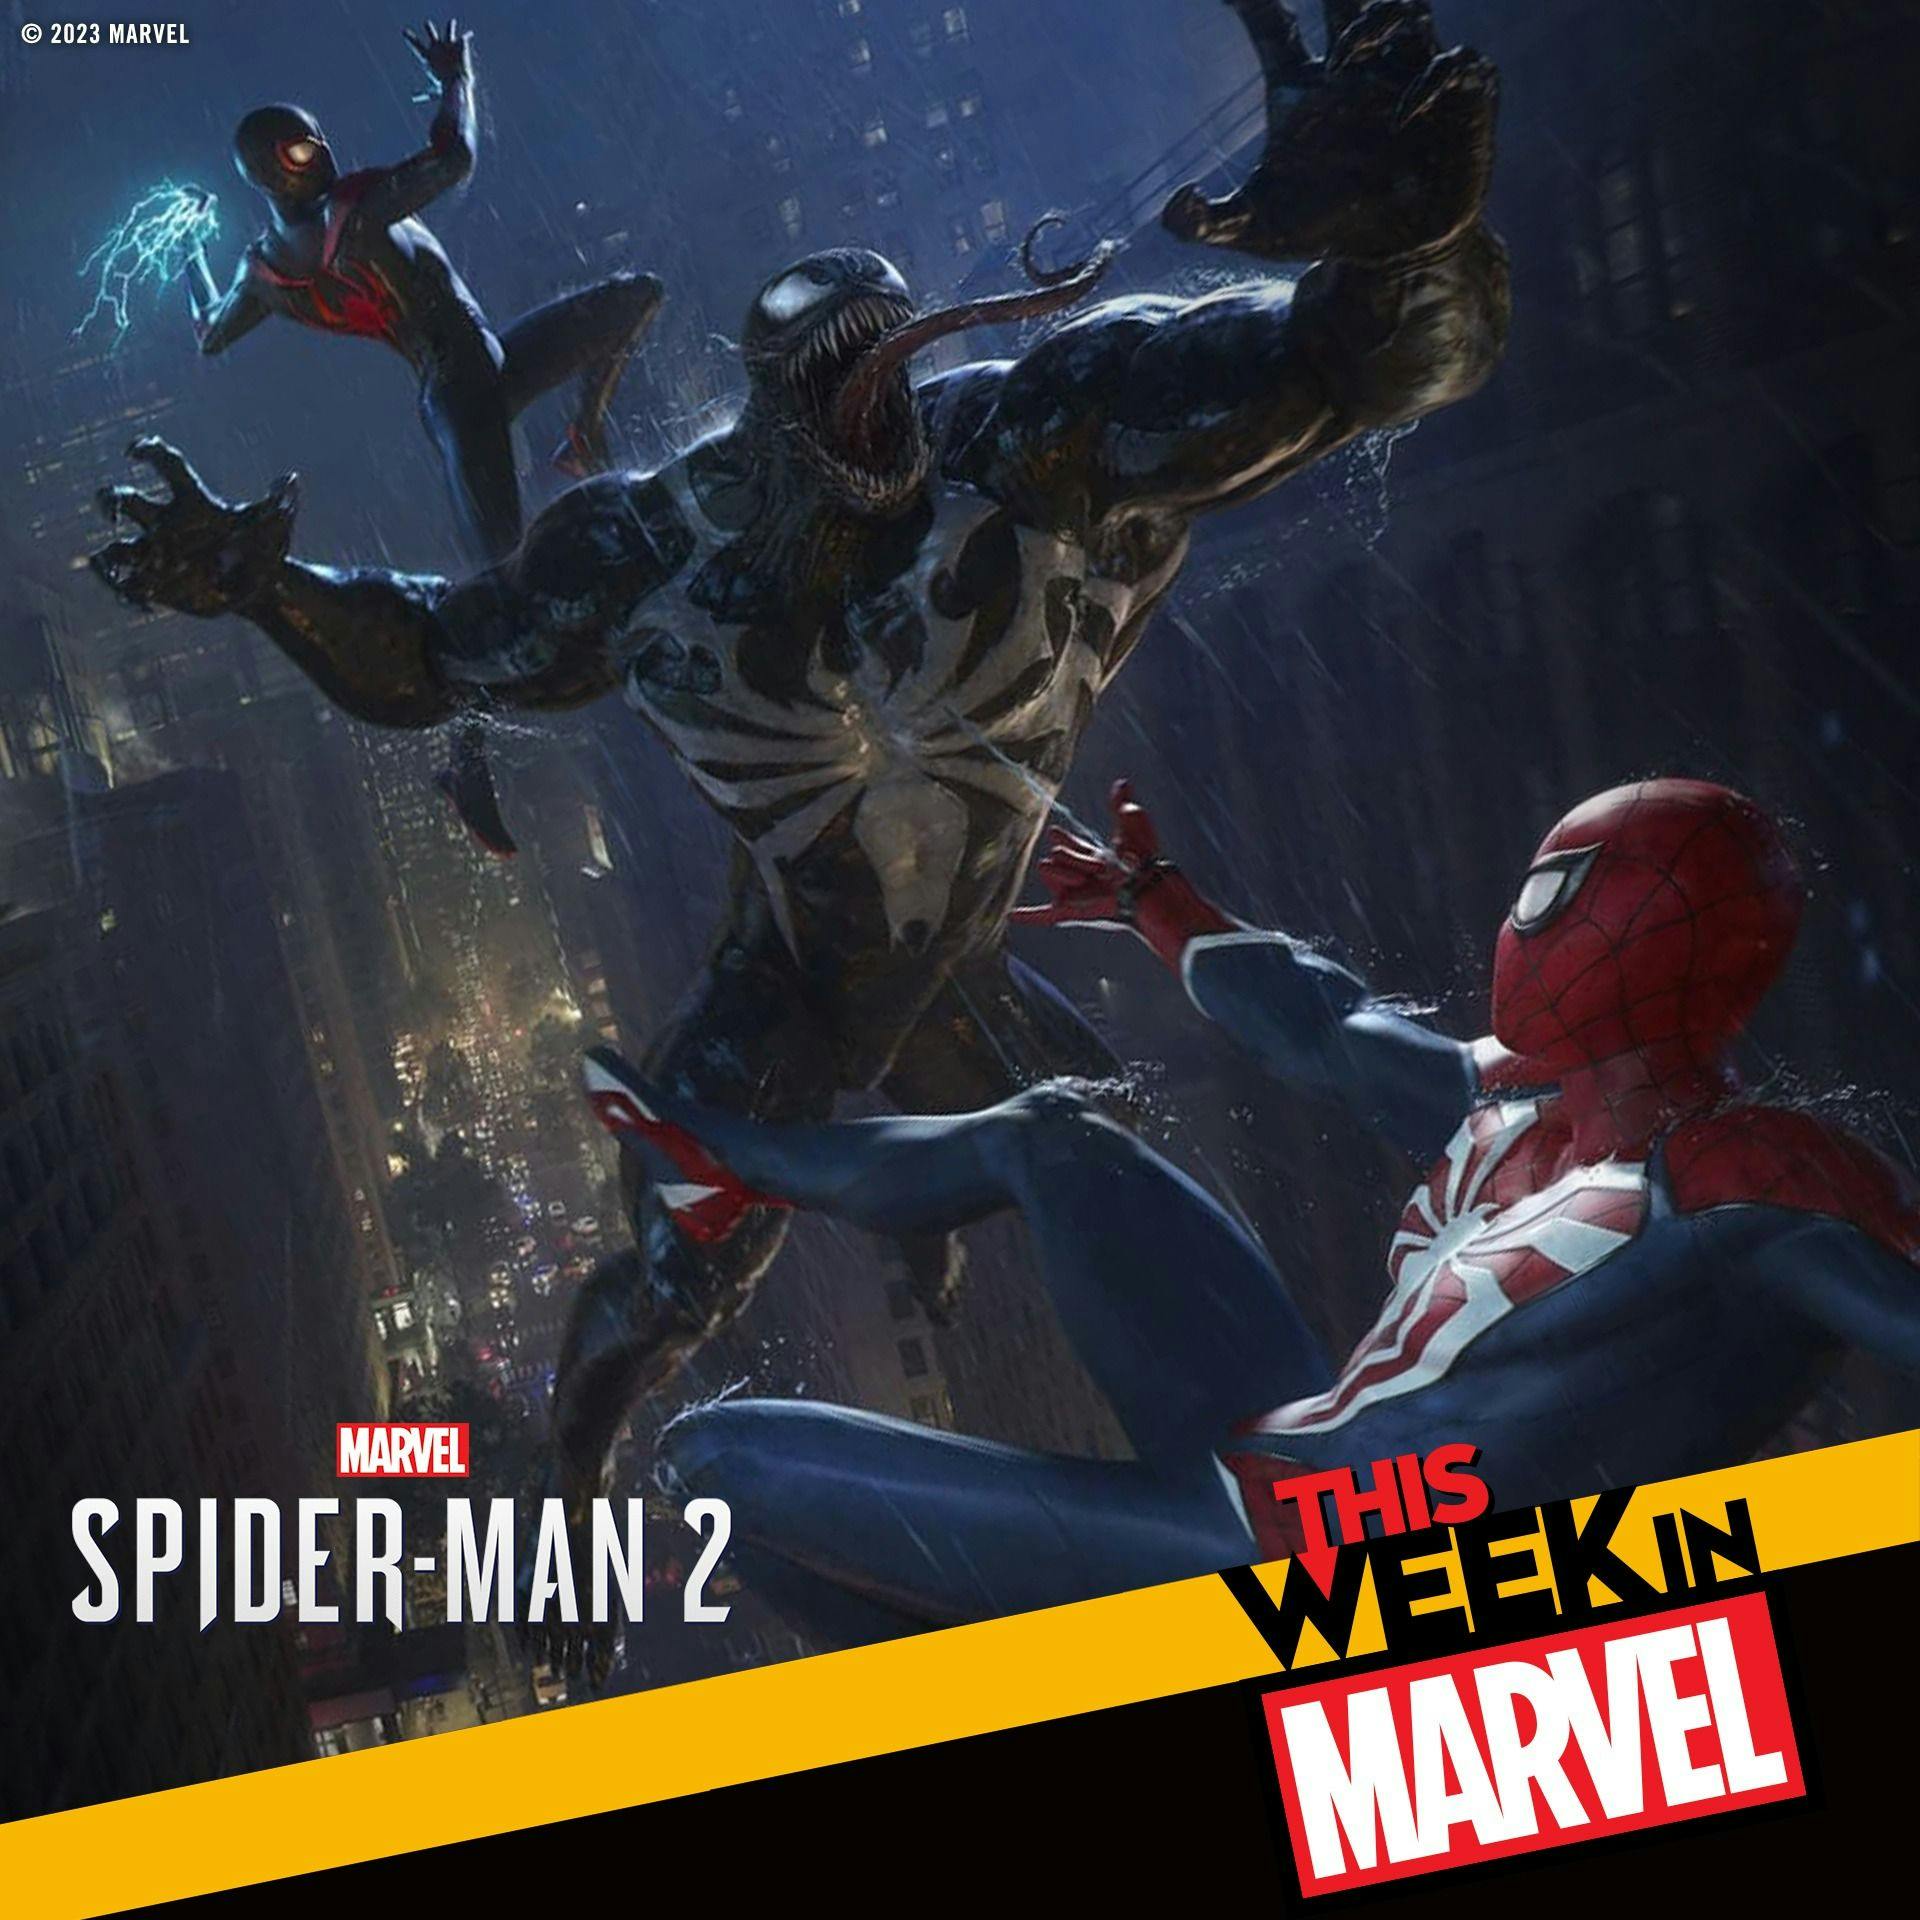 Marvel’s Spider-Man 2 Spoilercast with Bryan Intihar + Bill Rosemann, What If...? Season 2, Spider-Woman, And More!